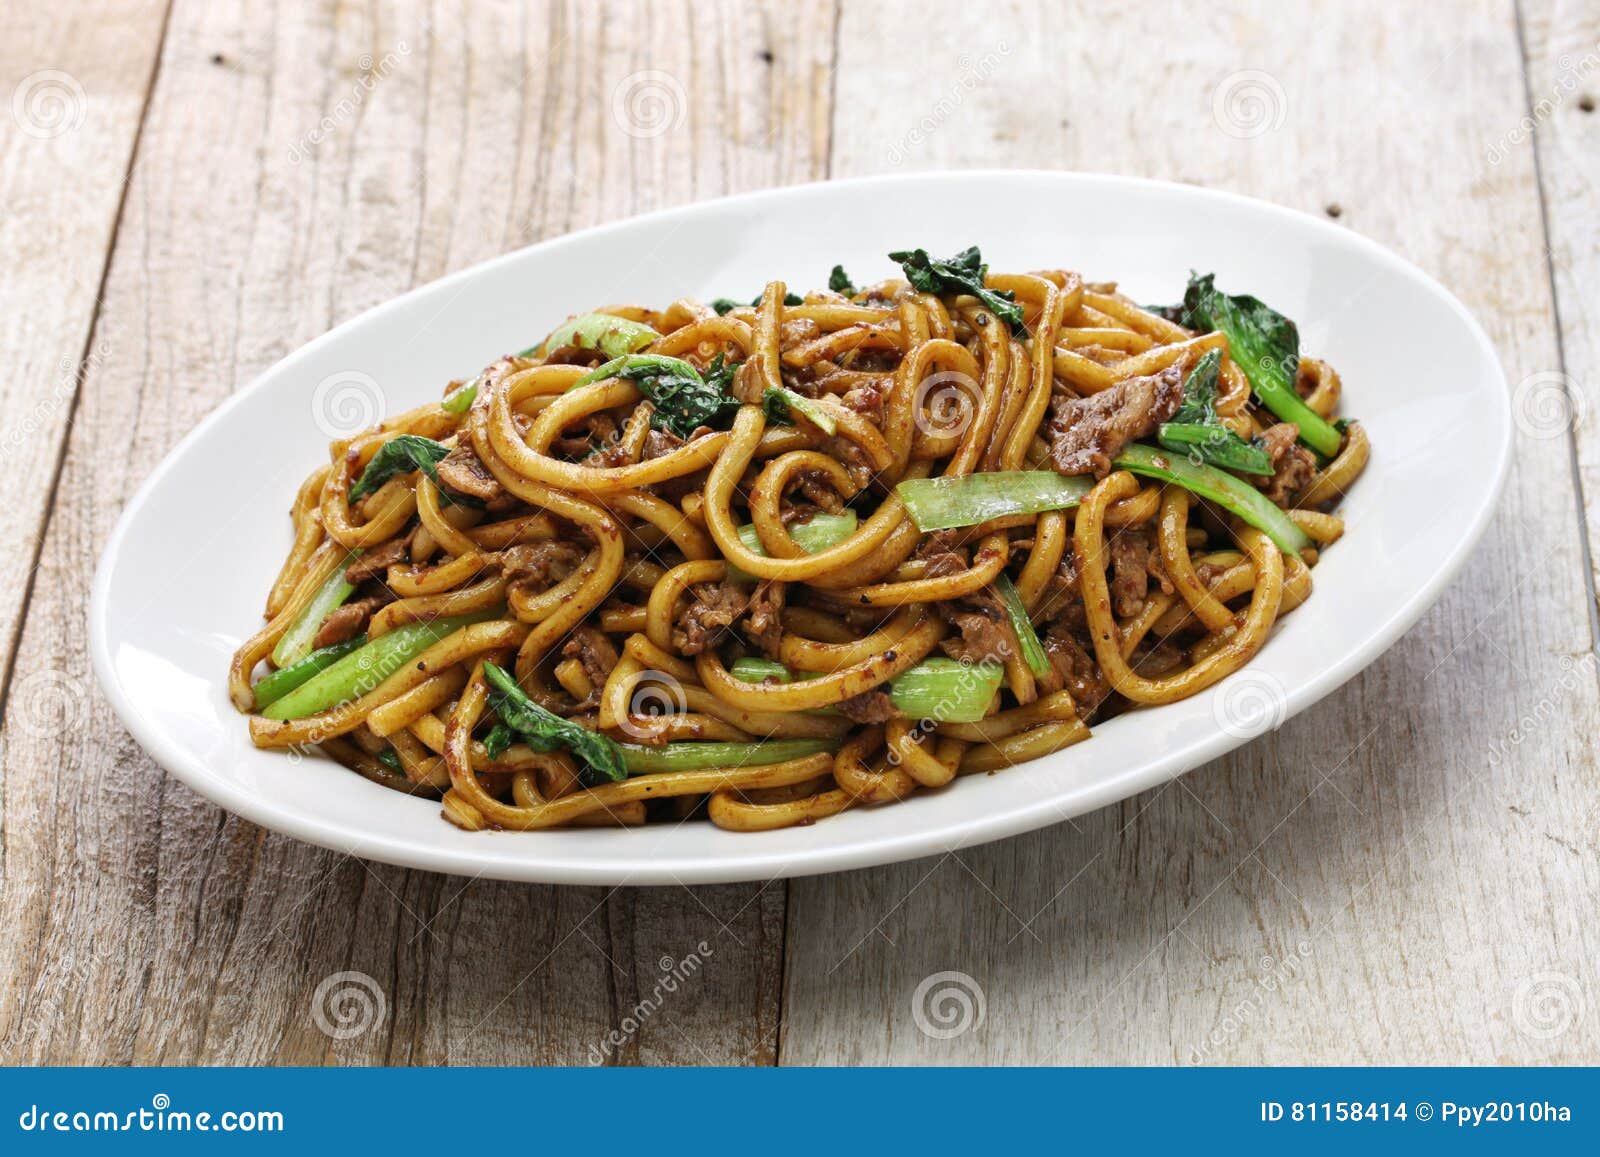 Shanghai Fried Noodle, Shanghai Chow Mein Stock Photo - Image of chow ...